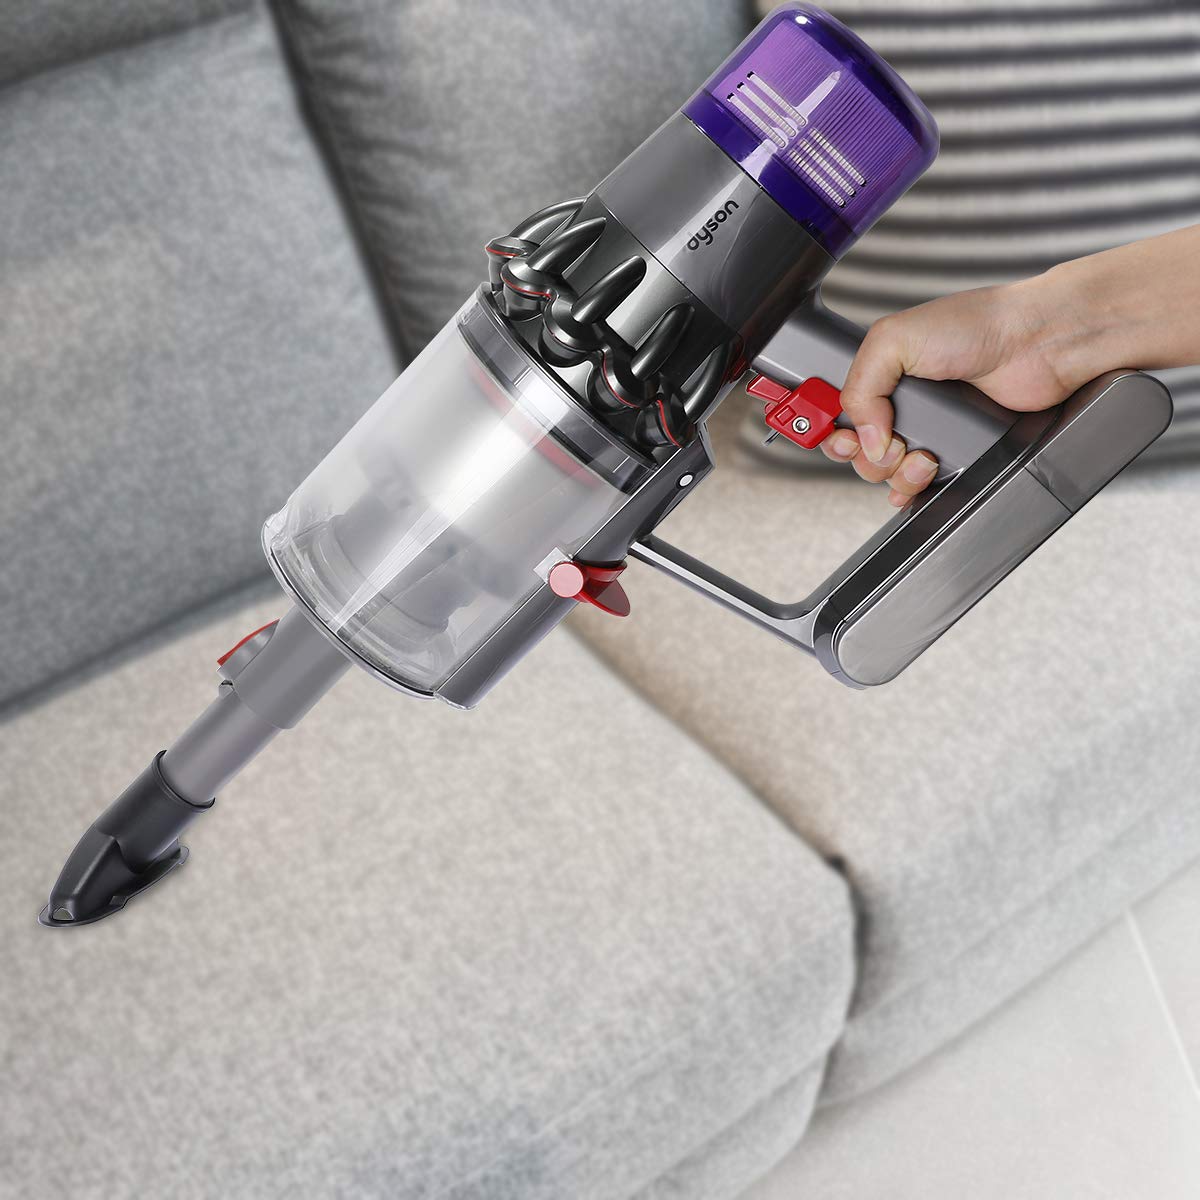 The Attachment Adapter is easy to mount on and take down by pressing the button, perfectly matches 1 1/4-inch universal attachment heads, such as horse hair brushes, hardwood floor heads, etc